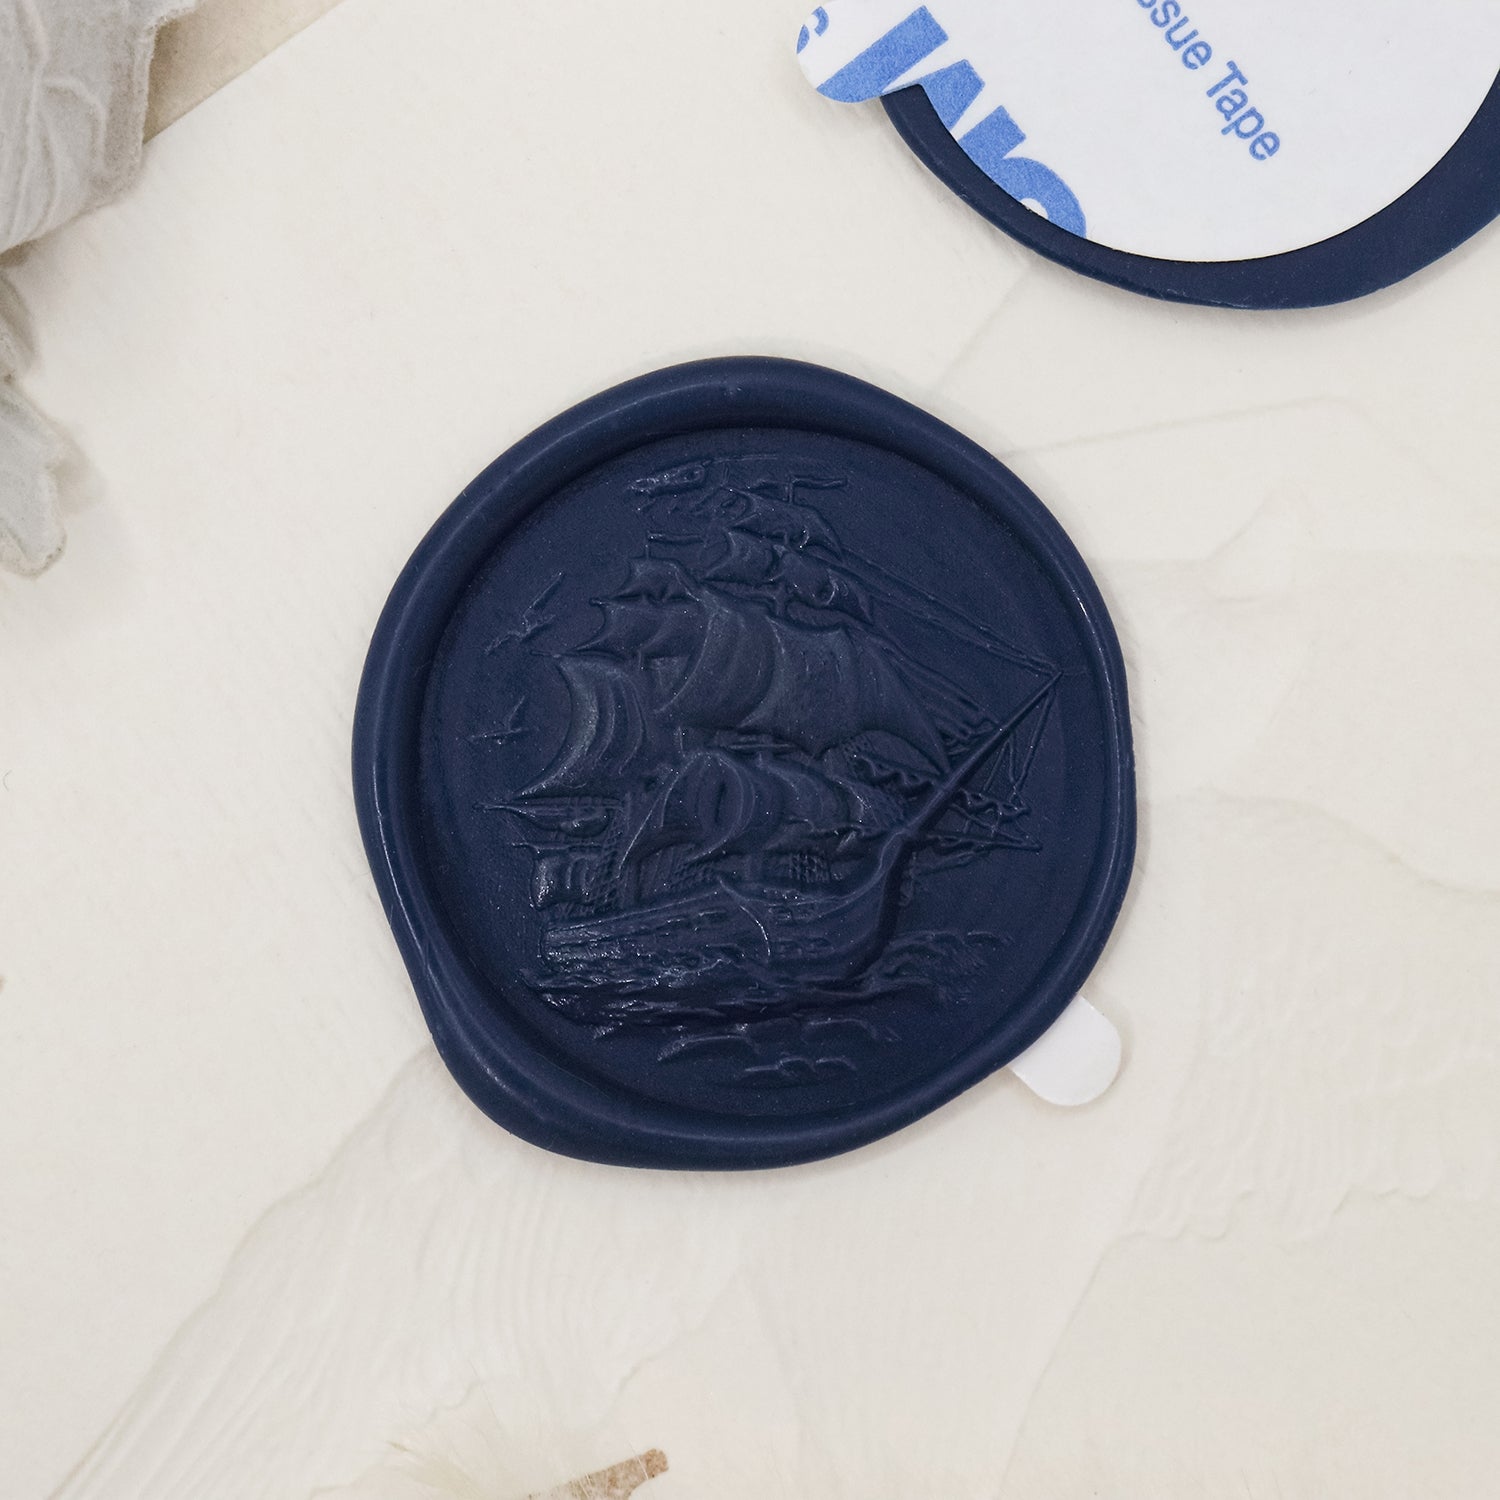 Stamprints 3D Relief Sailing Ship Self-adhesive Wax Seal Stickers 1